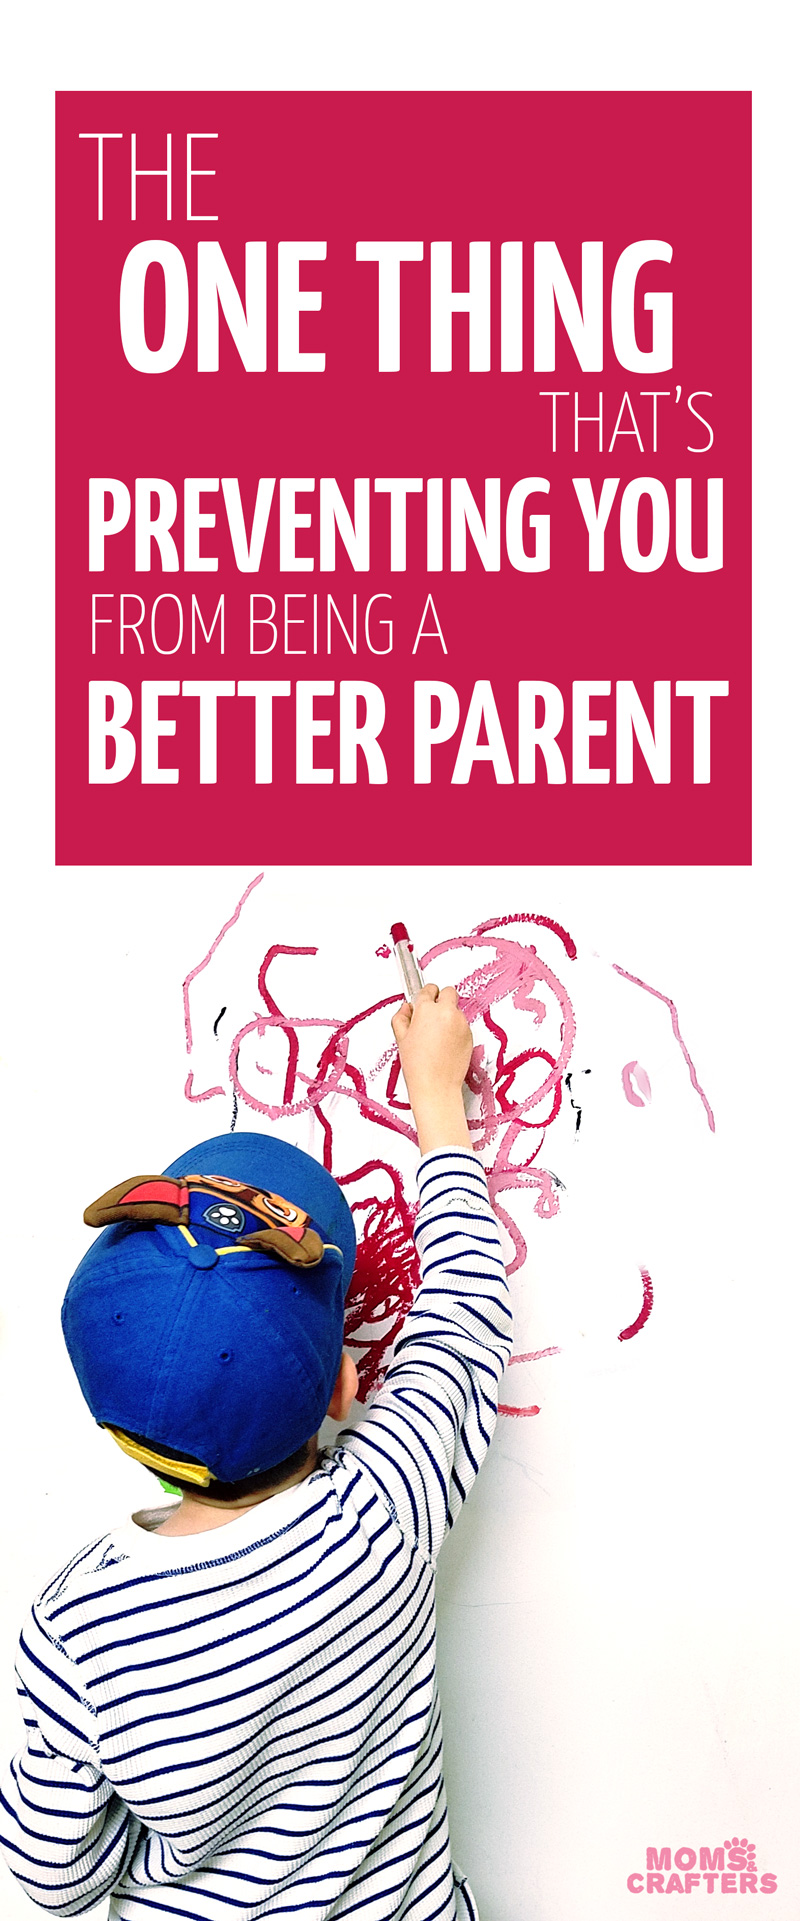 The one thing that's stopping you from being a better parent might not be what you think. Why do you react poorly when you know positive parenting principles and tips? This is why. #positiveparenting #parenting #toddlers #parentingtips